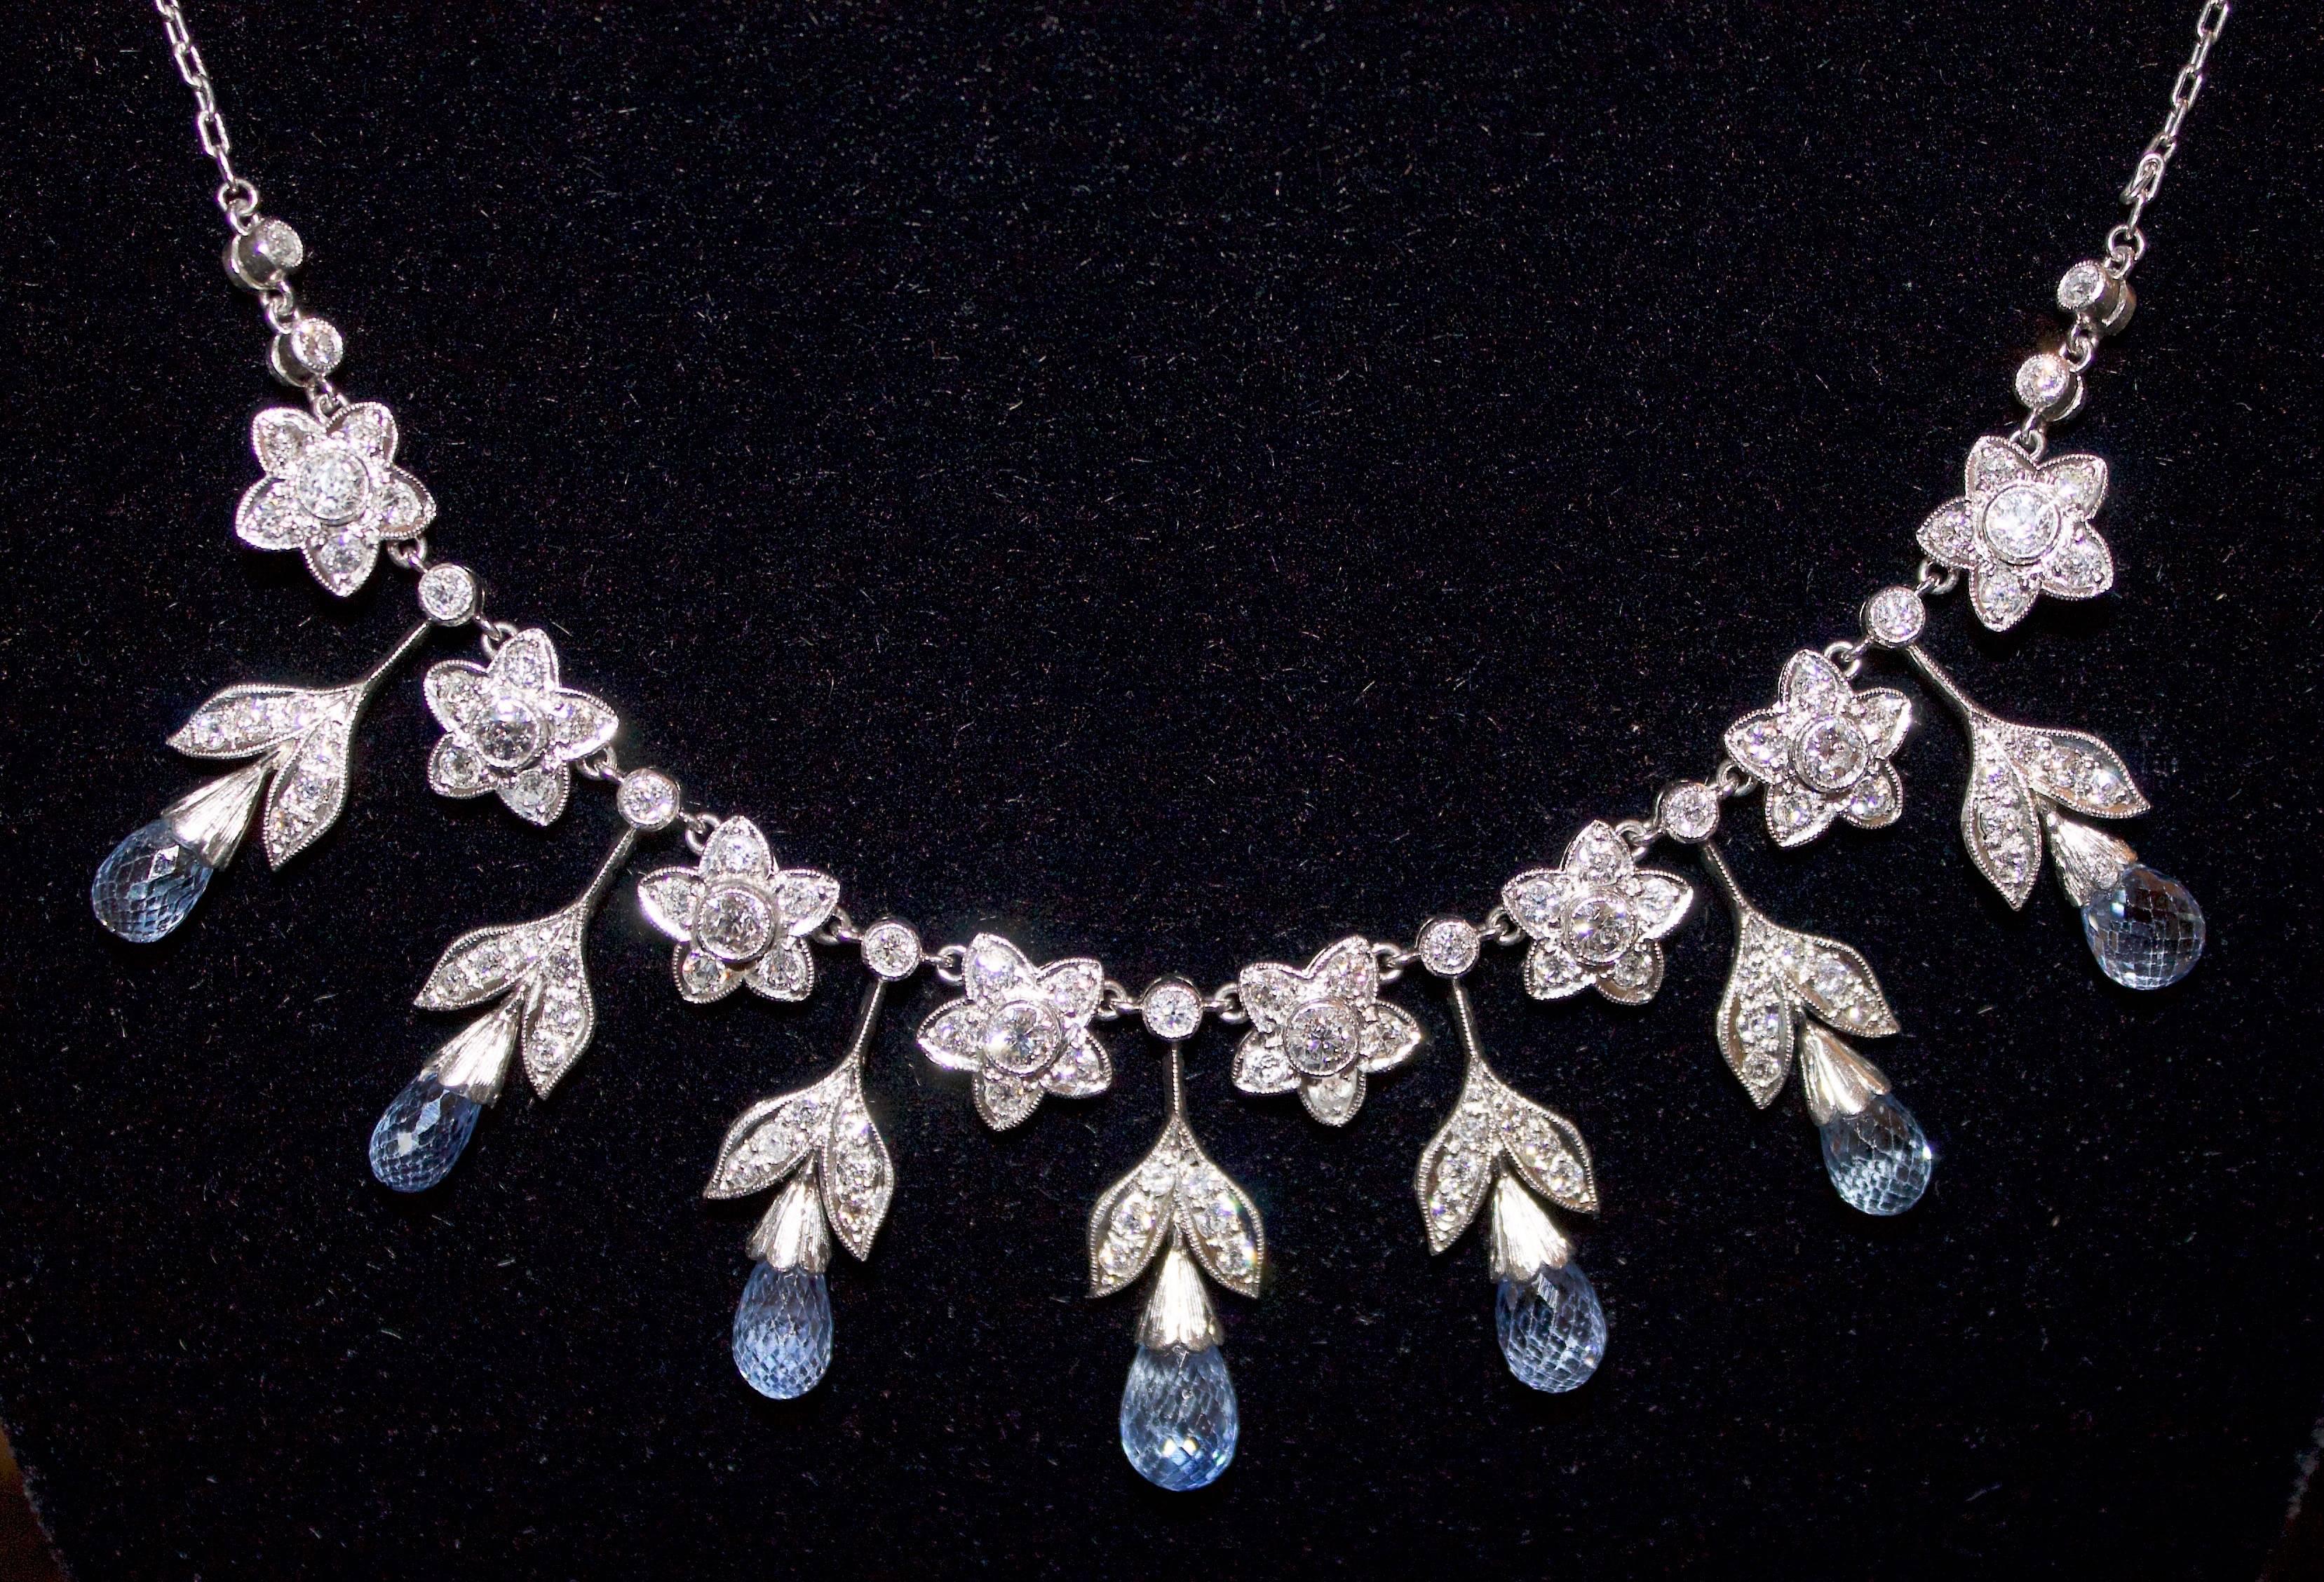 Elegant Dangling Sapphire and Diamond 1930's Necklace 
Seven Briolette  Sapphires weighing 6.50 carats (approximately)  
Old European diamonds weighing 3.75 carats (approximately)  
As you Dance the Bottom Pieces Sway Back and Forth
Dancing Not